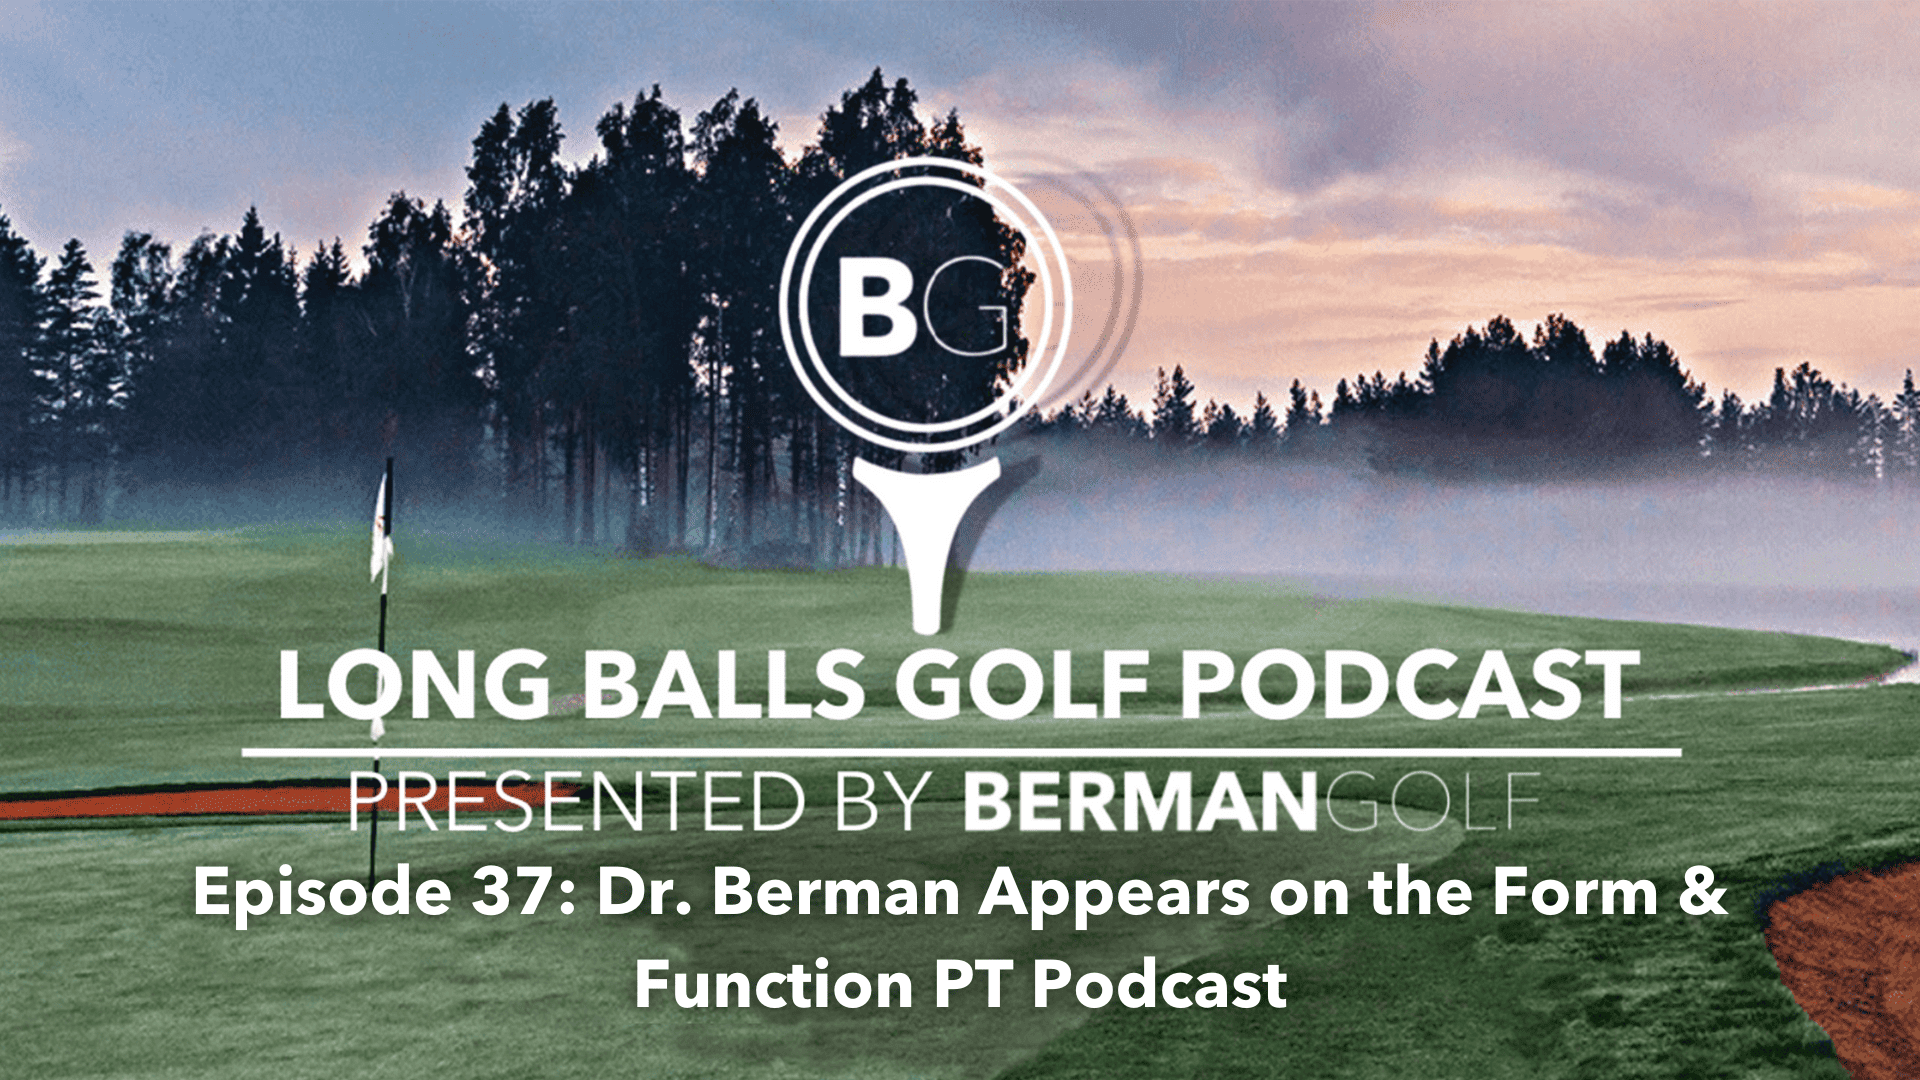 Episode 37: Dr. Berman Appears on the Form & Function PT Podcast